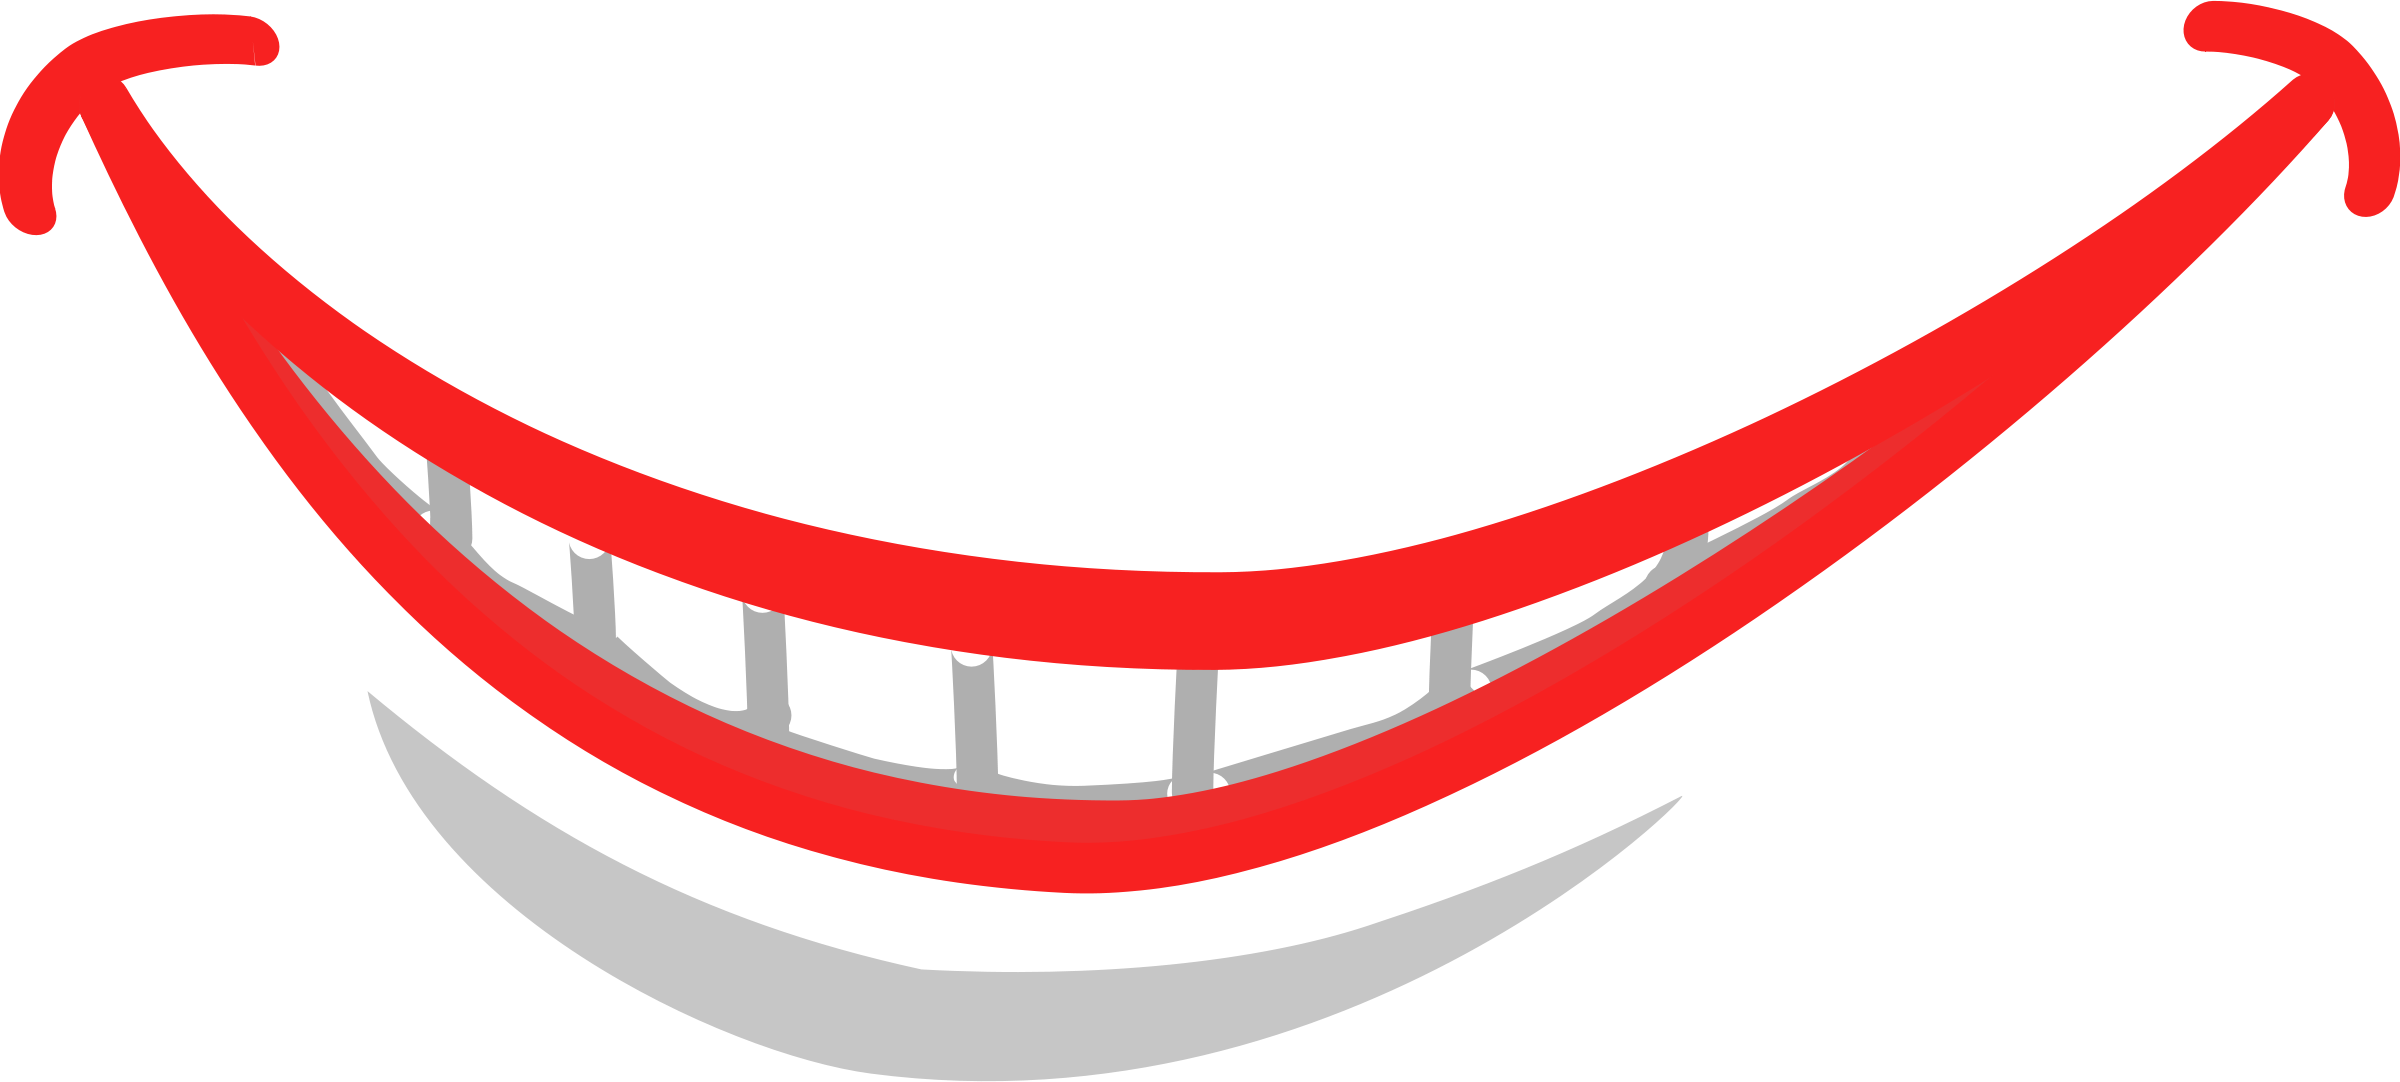 Cartoon Mouth Smile - ClipArt Best - Cliparts.co